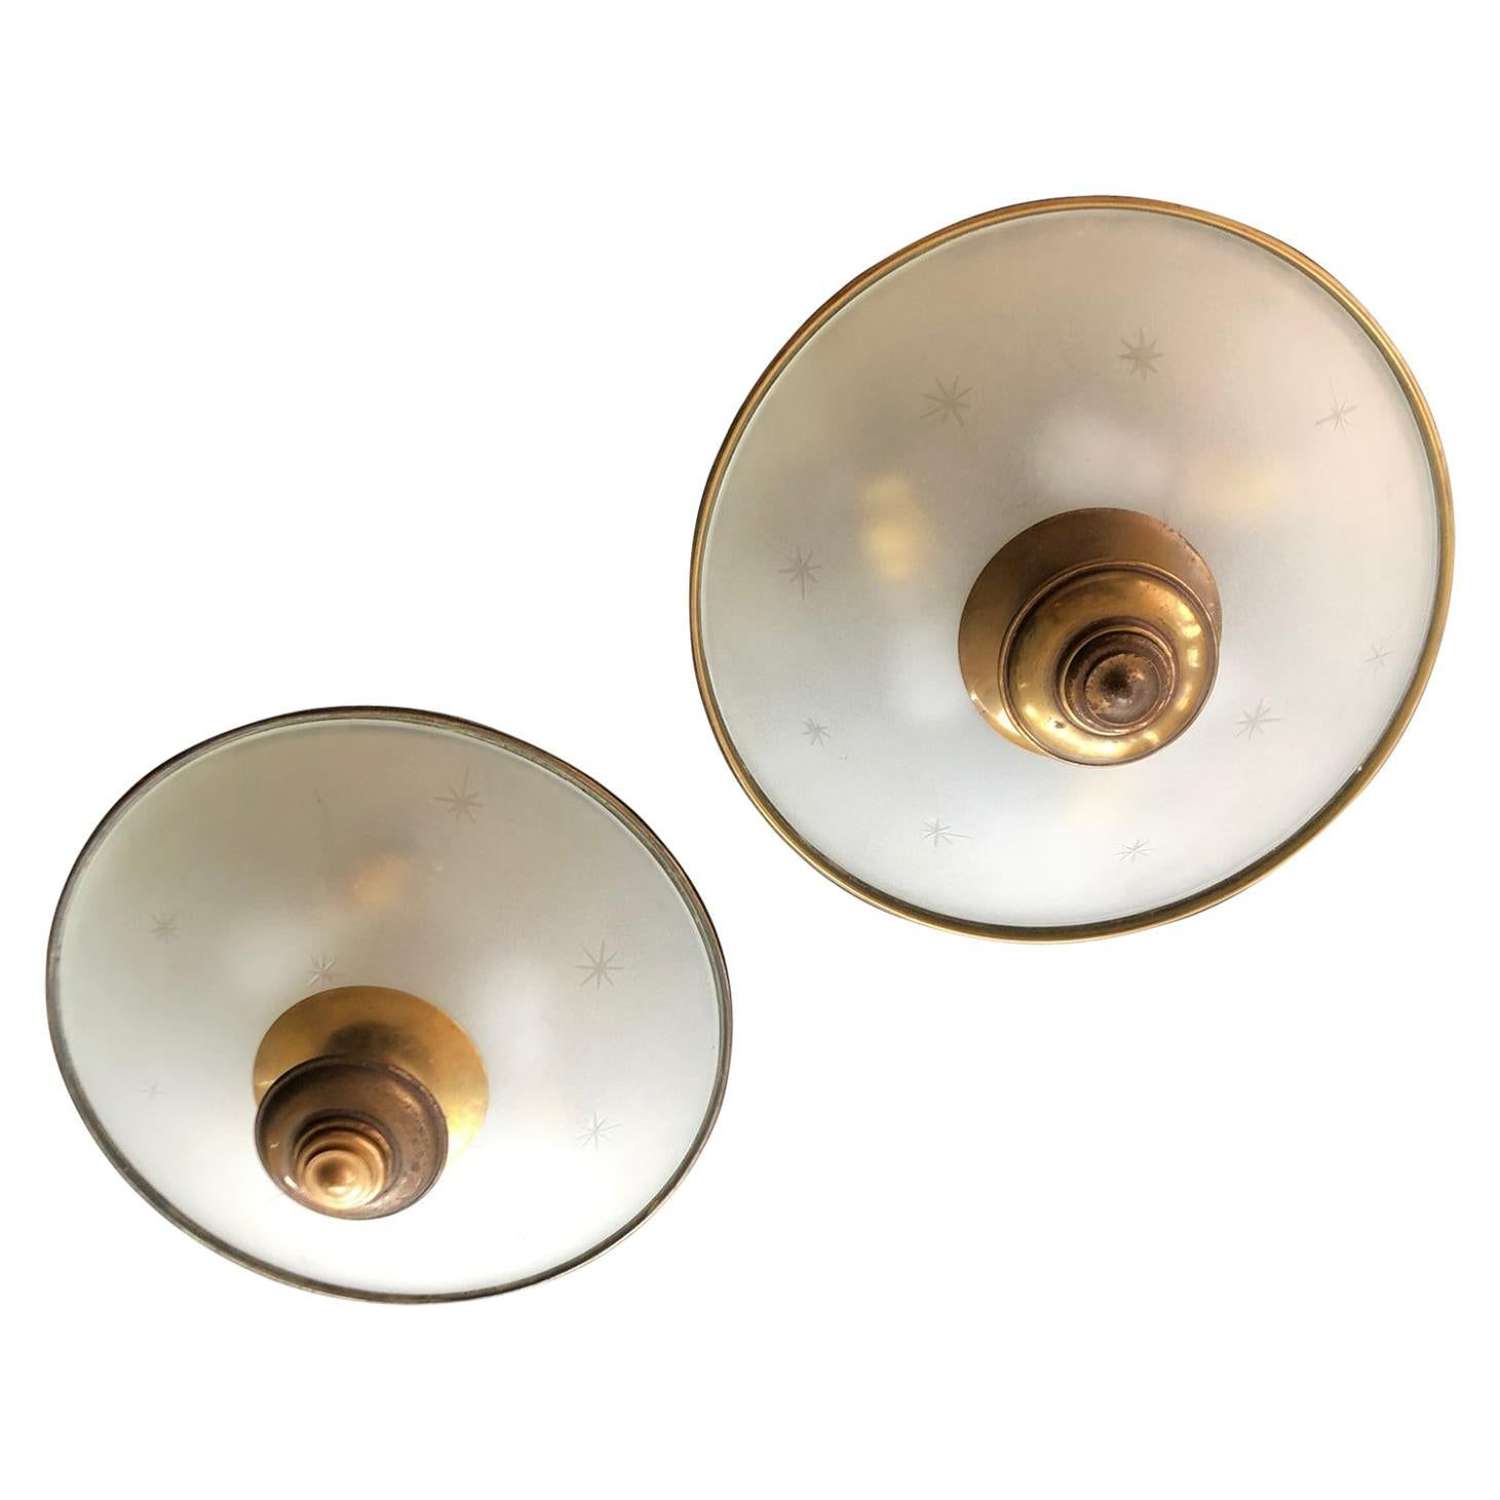 Pair of Midcentury Italian Brass and Glass Ceiling or Wall Lights